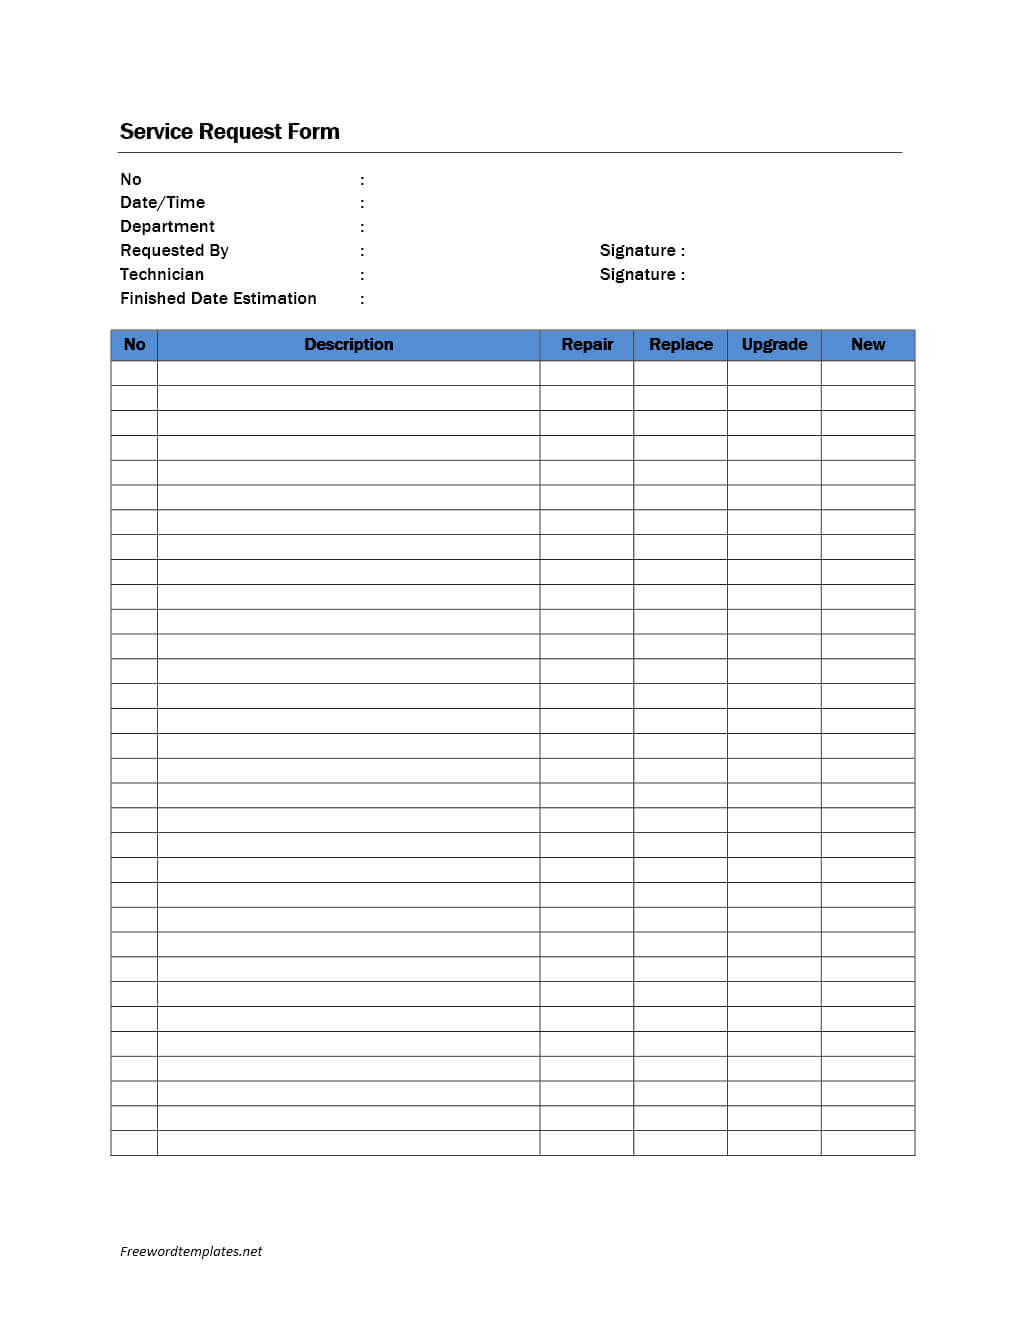 Request Form Template Doc Travel Excel Pdf Donation Service Pertaining To Travel Request Form Template Word